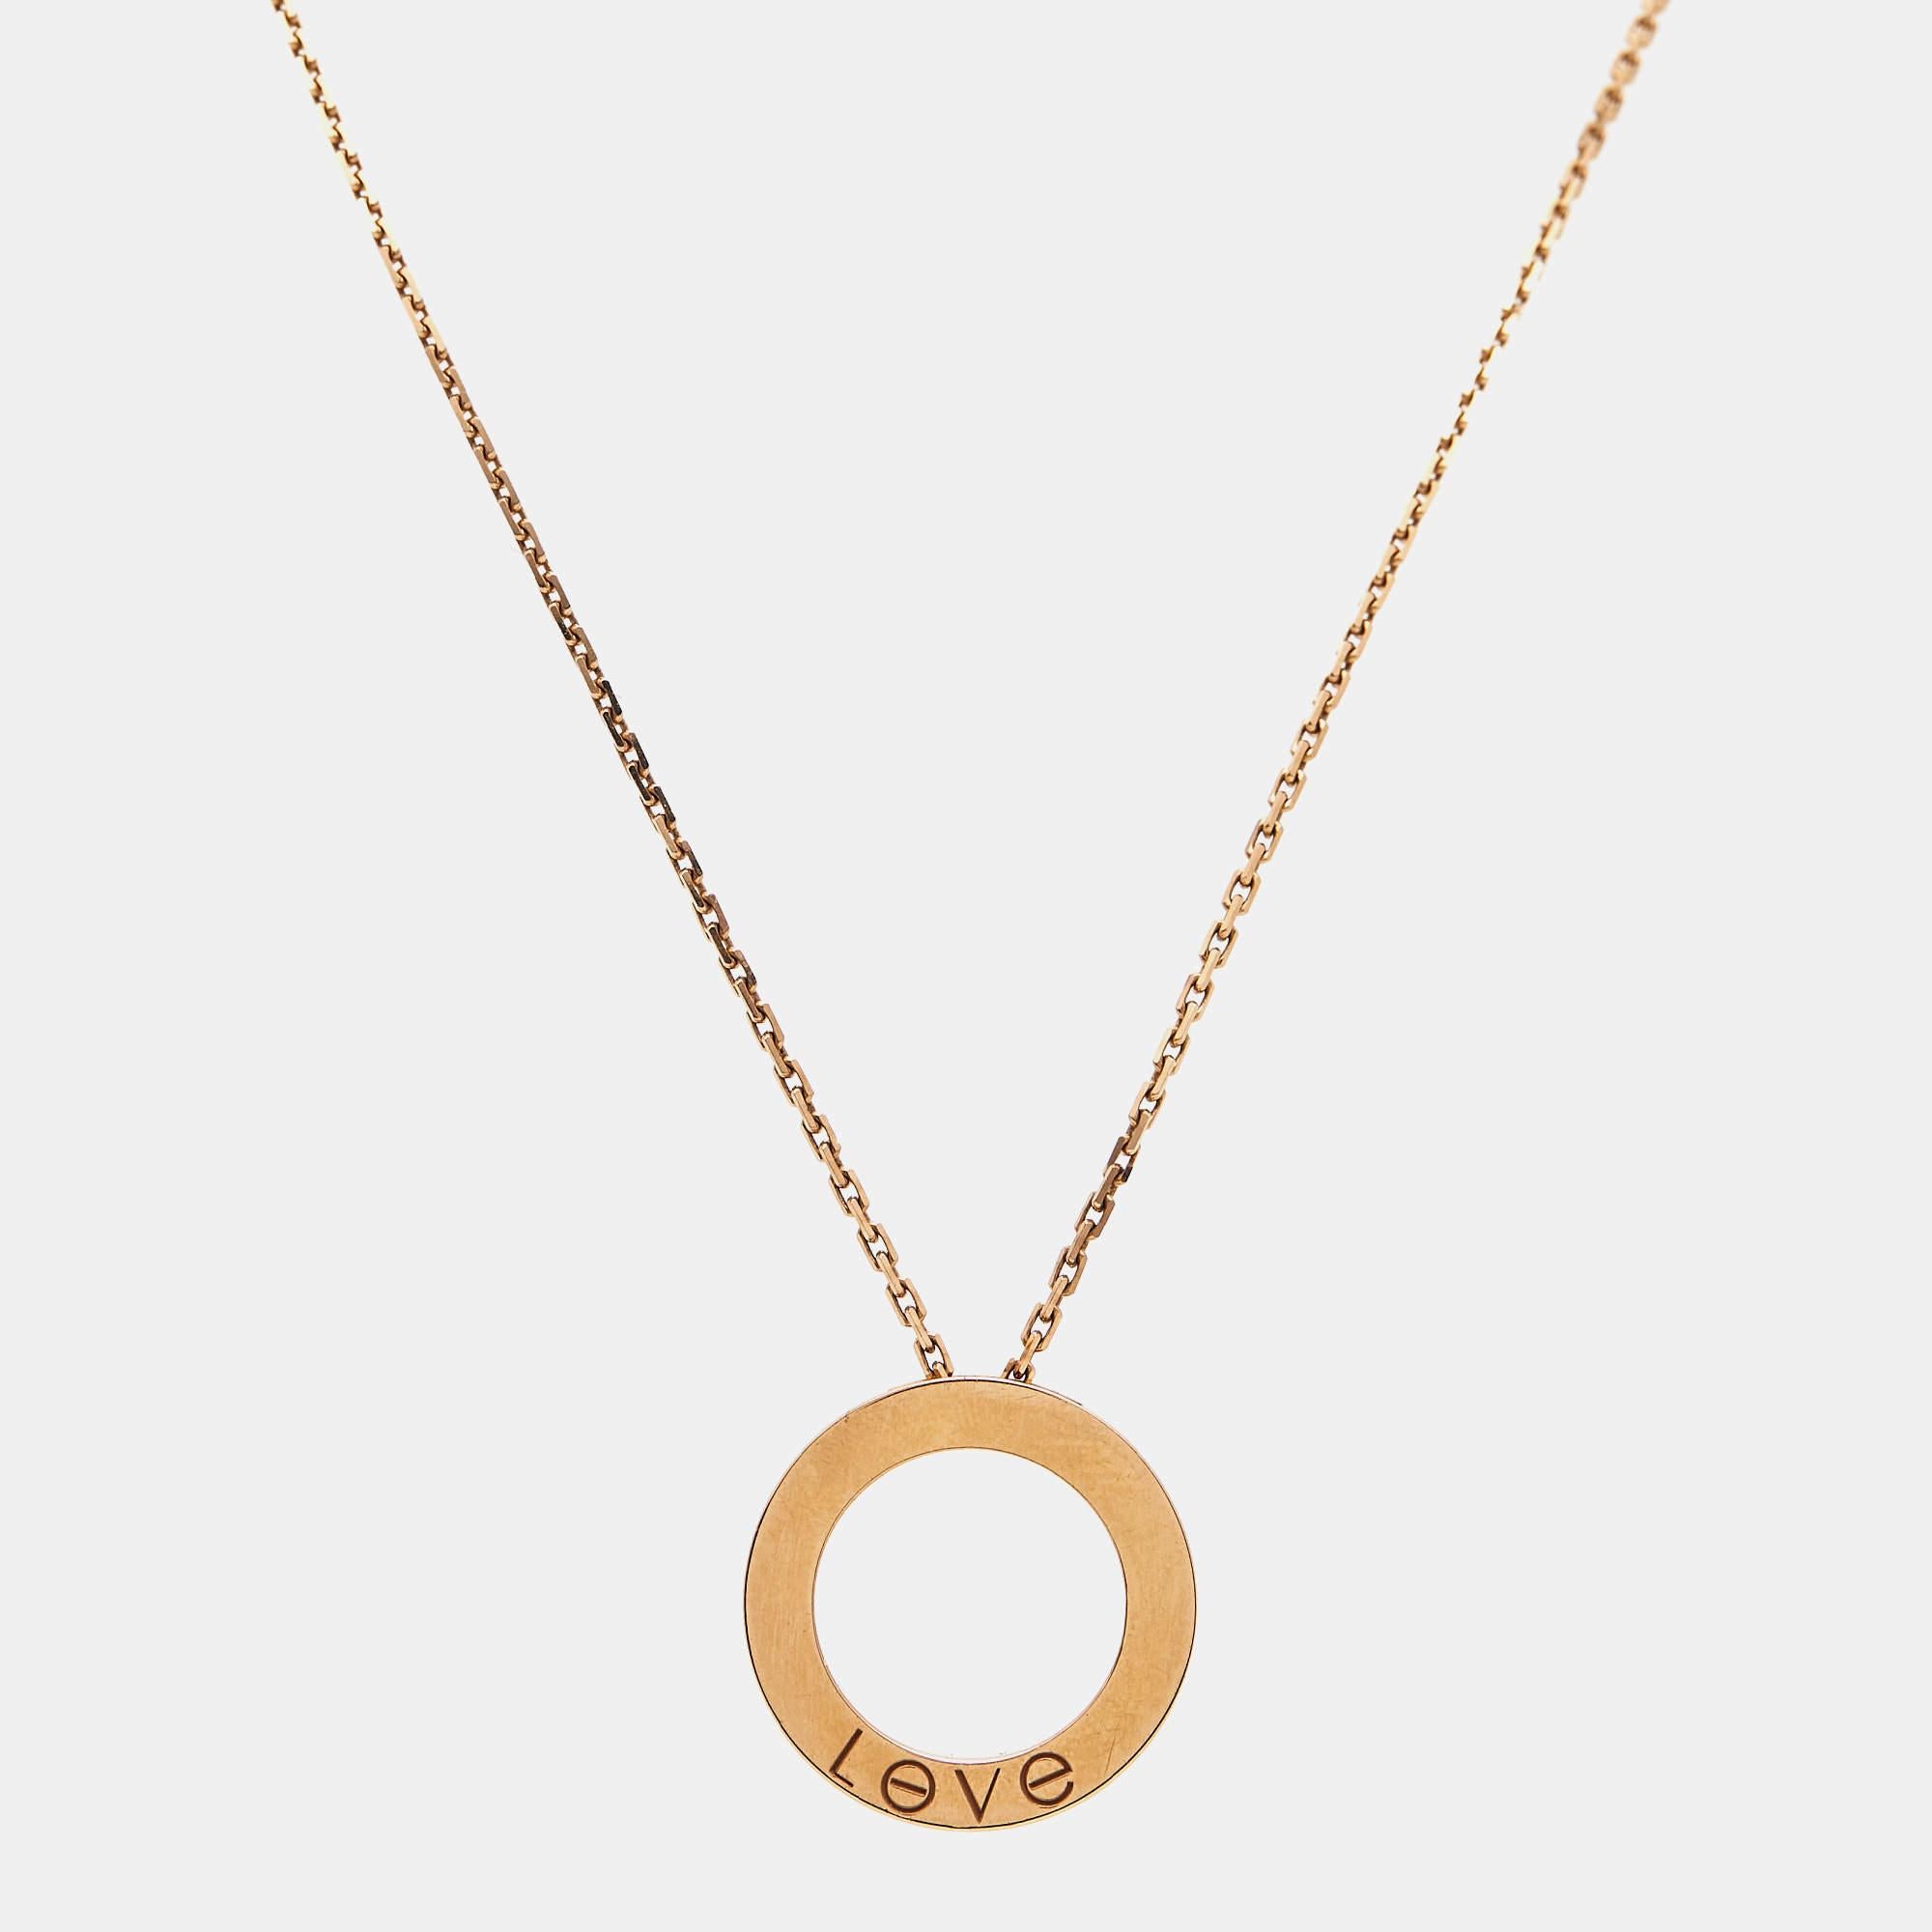 This radiant Love necklace from Cartier is not only beautiful to look at but also a timeless piece that will be cherished for years to come! It has been crafted from 18K rose gold and features a chain-link carrying a ring pendant detailed with three